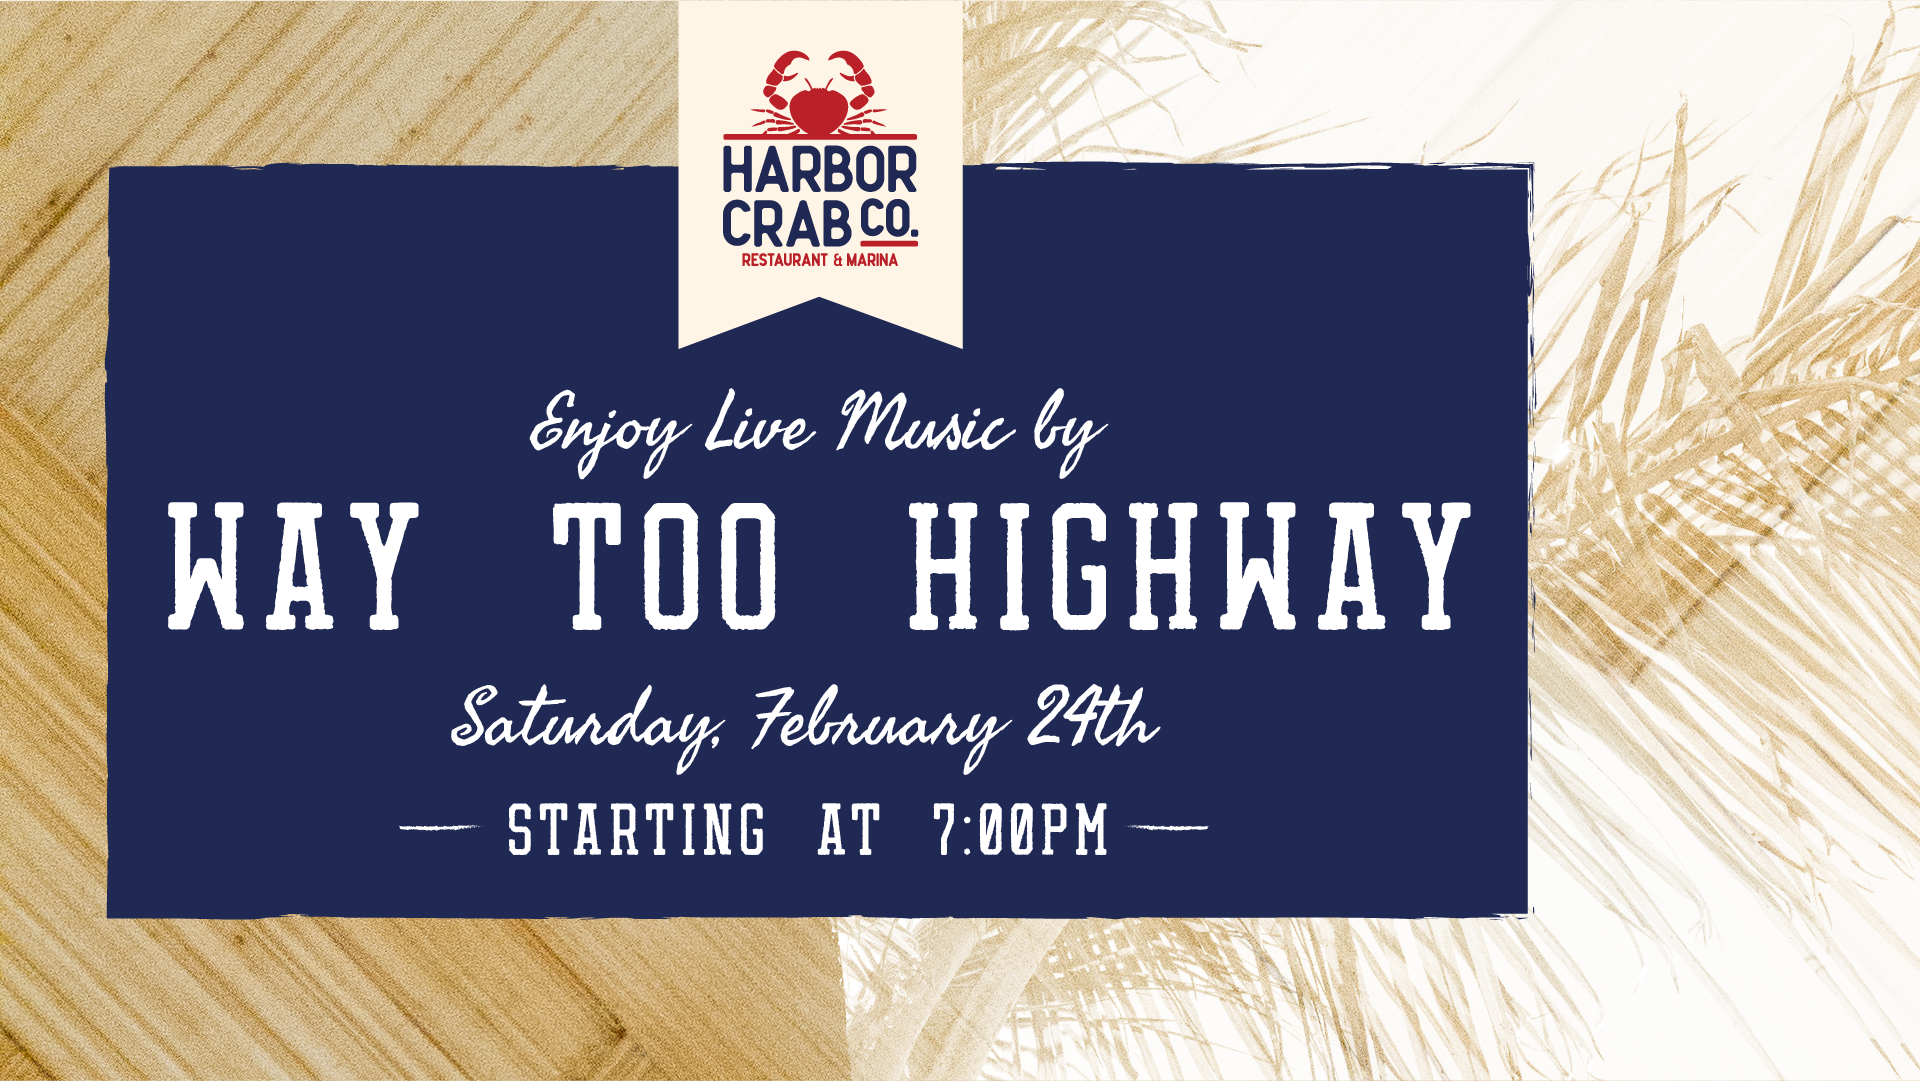 Event cover for Harbor Crab Co. featuring live music by Way Too Highway on Saturday, February 24th, starting at 7:00 PM.